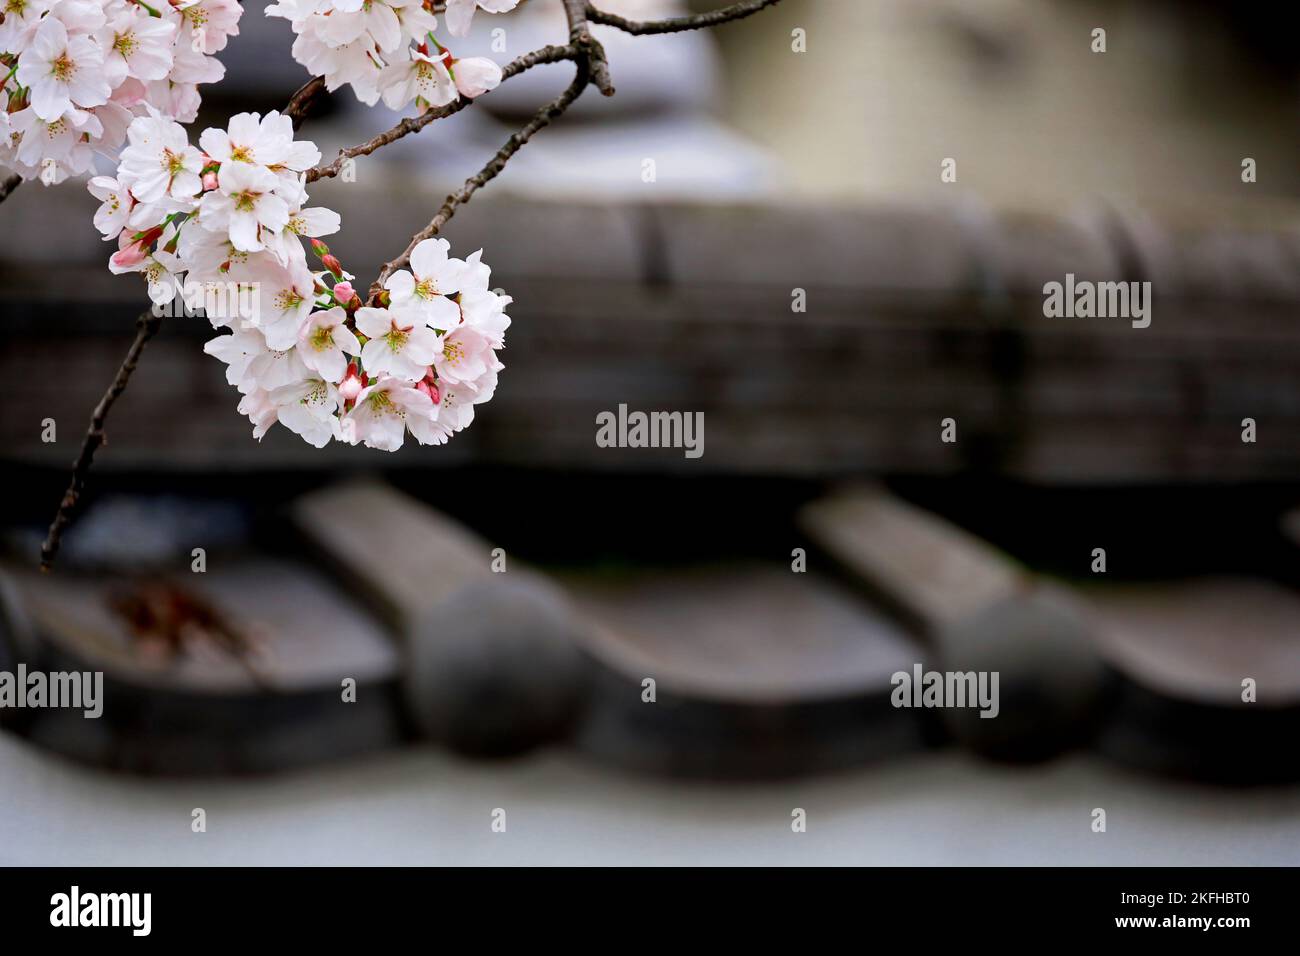 Scenery of Japan White mud wall with tiles and cherry blossoms Stock Photo